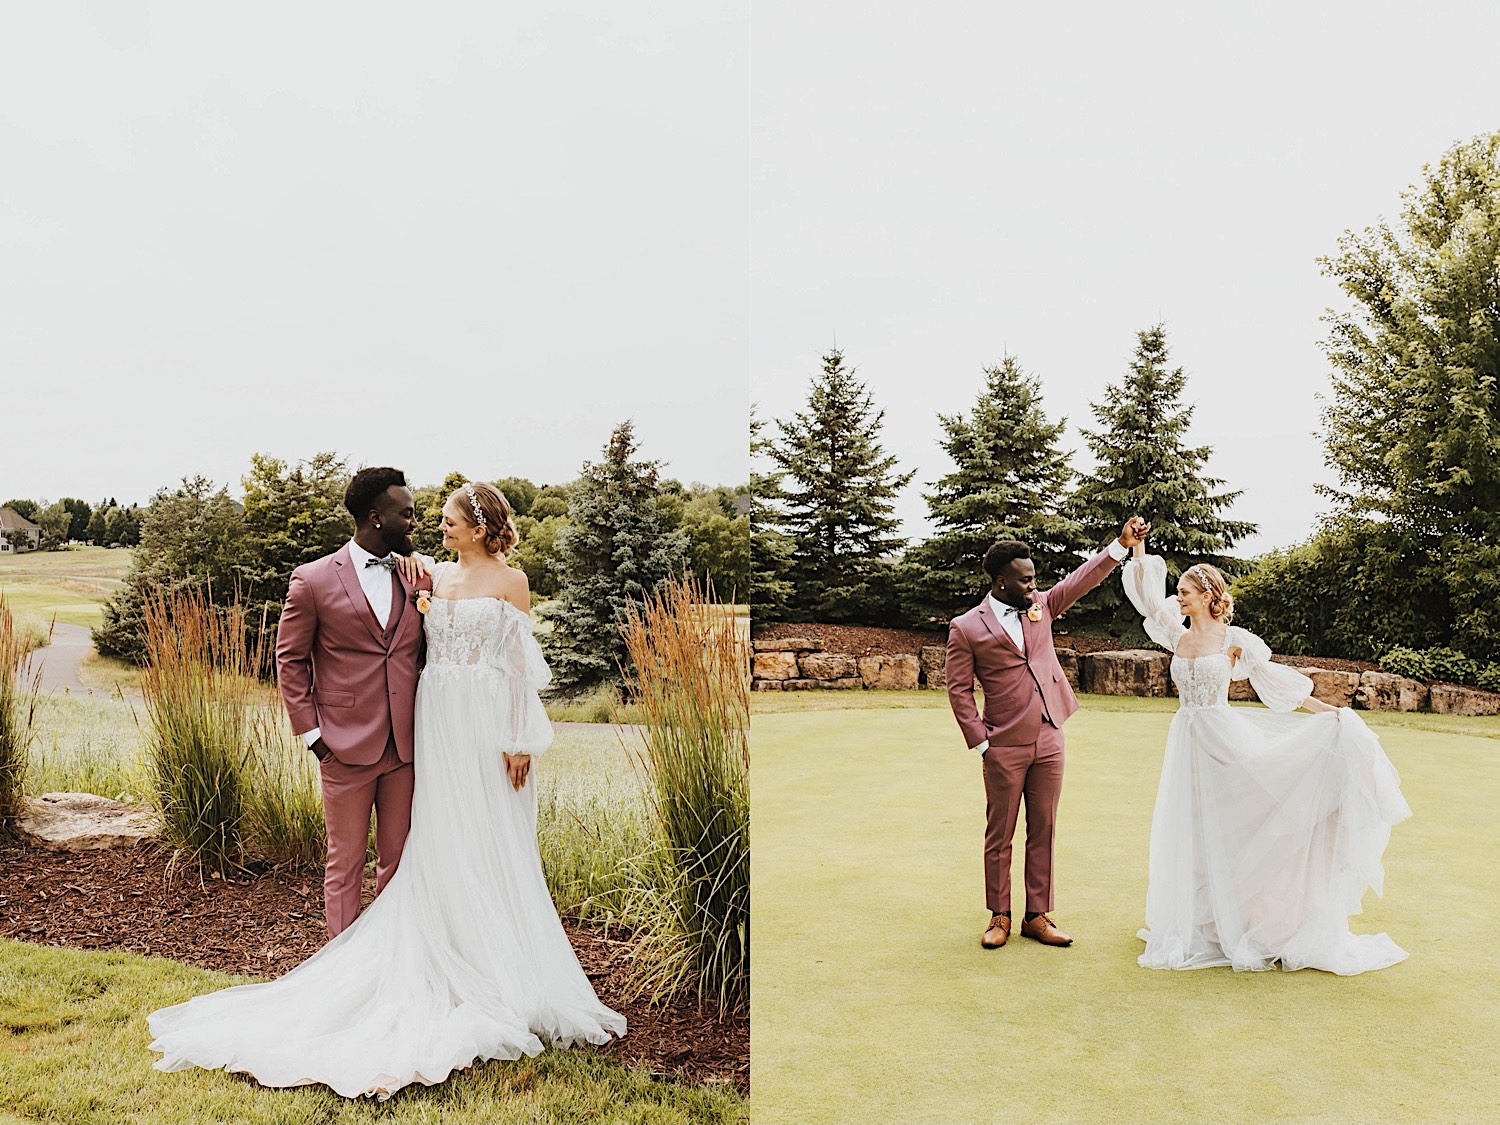 2 photos side by side of a bride and groom out on a golf course, the left photo is of them standing side by side and smiling at one another, the right is of them dancing together on a putting green